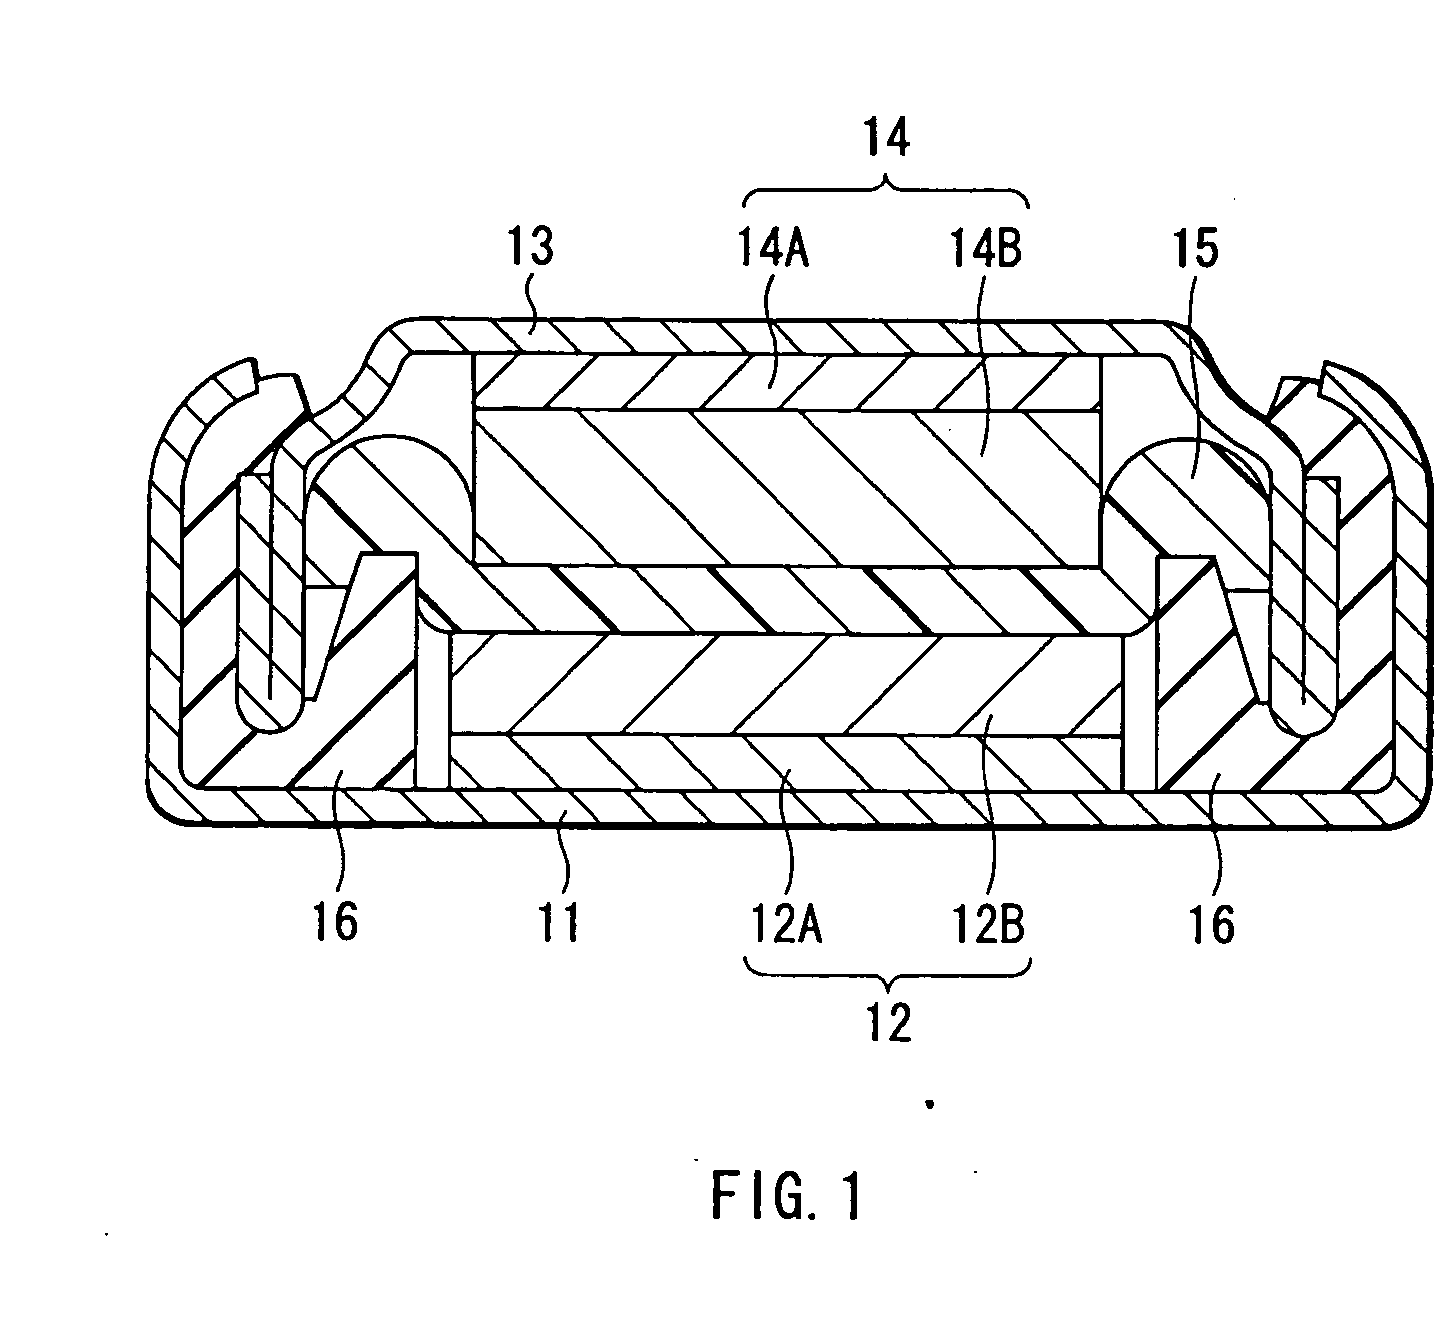 Battery, method of charging and discharging the battery and charge-discharge control device for the battery